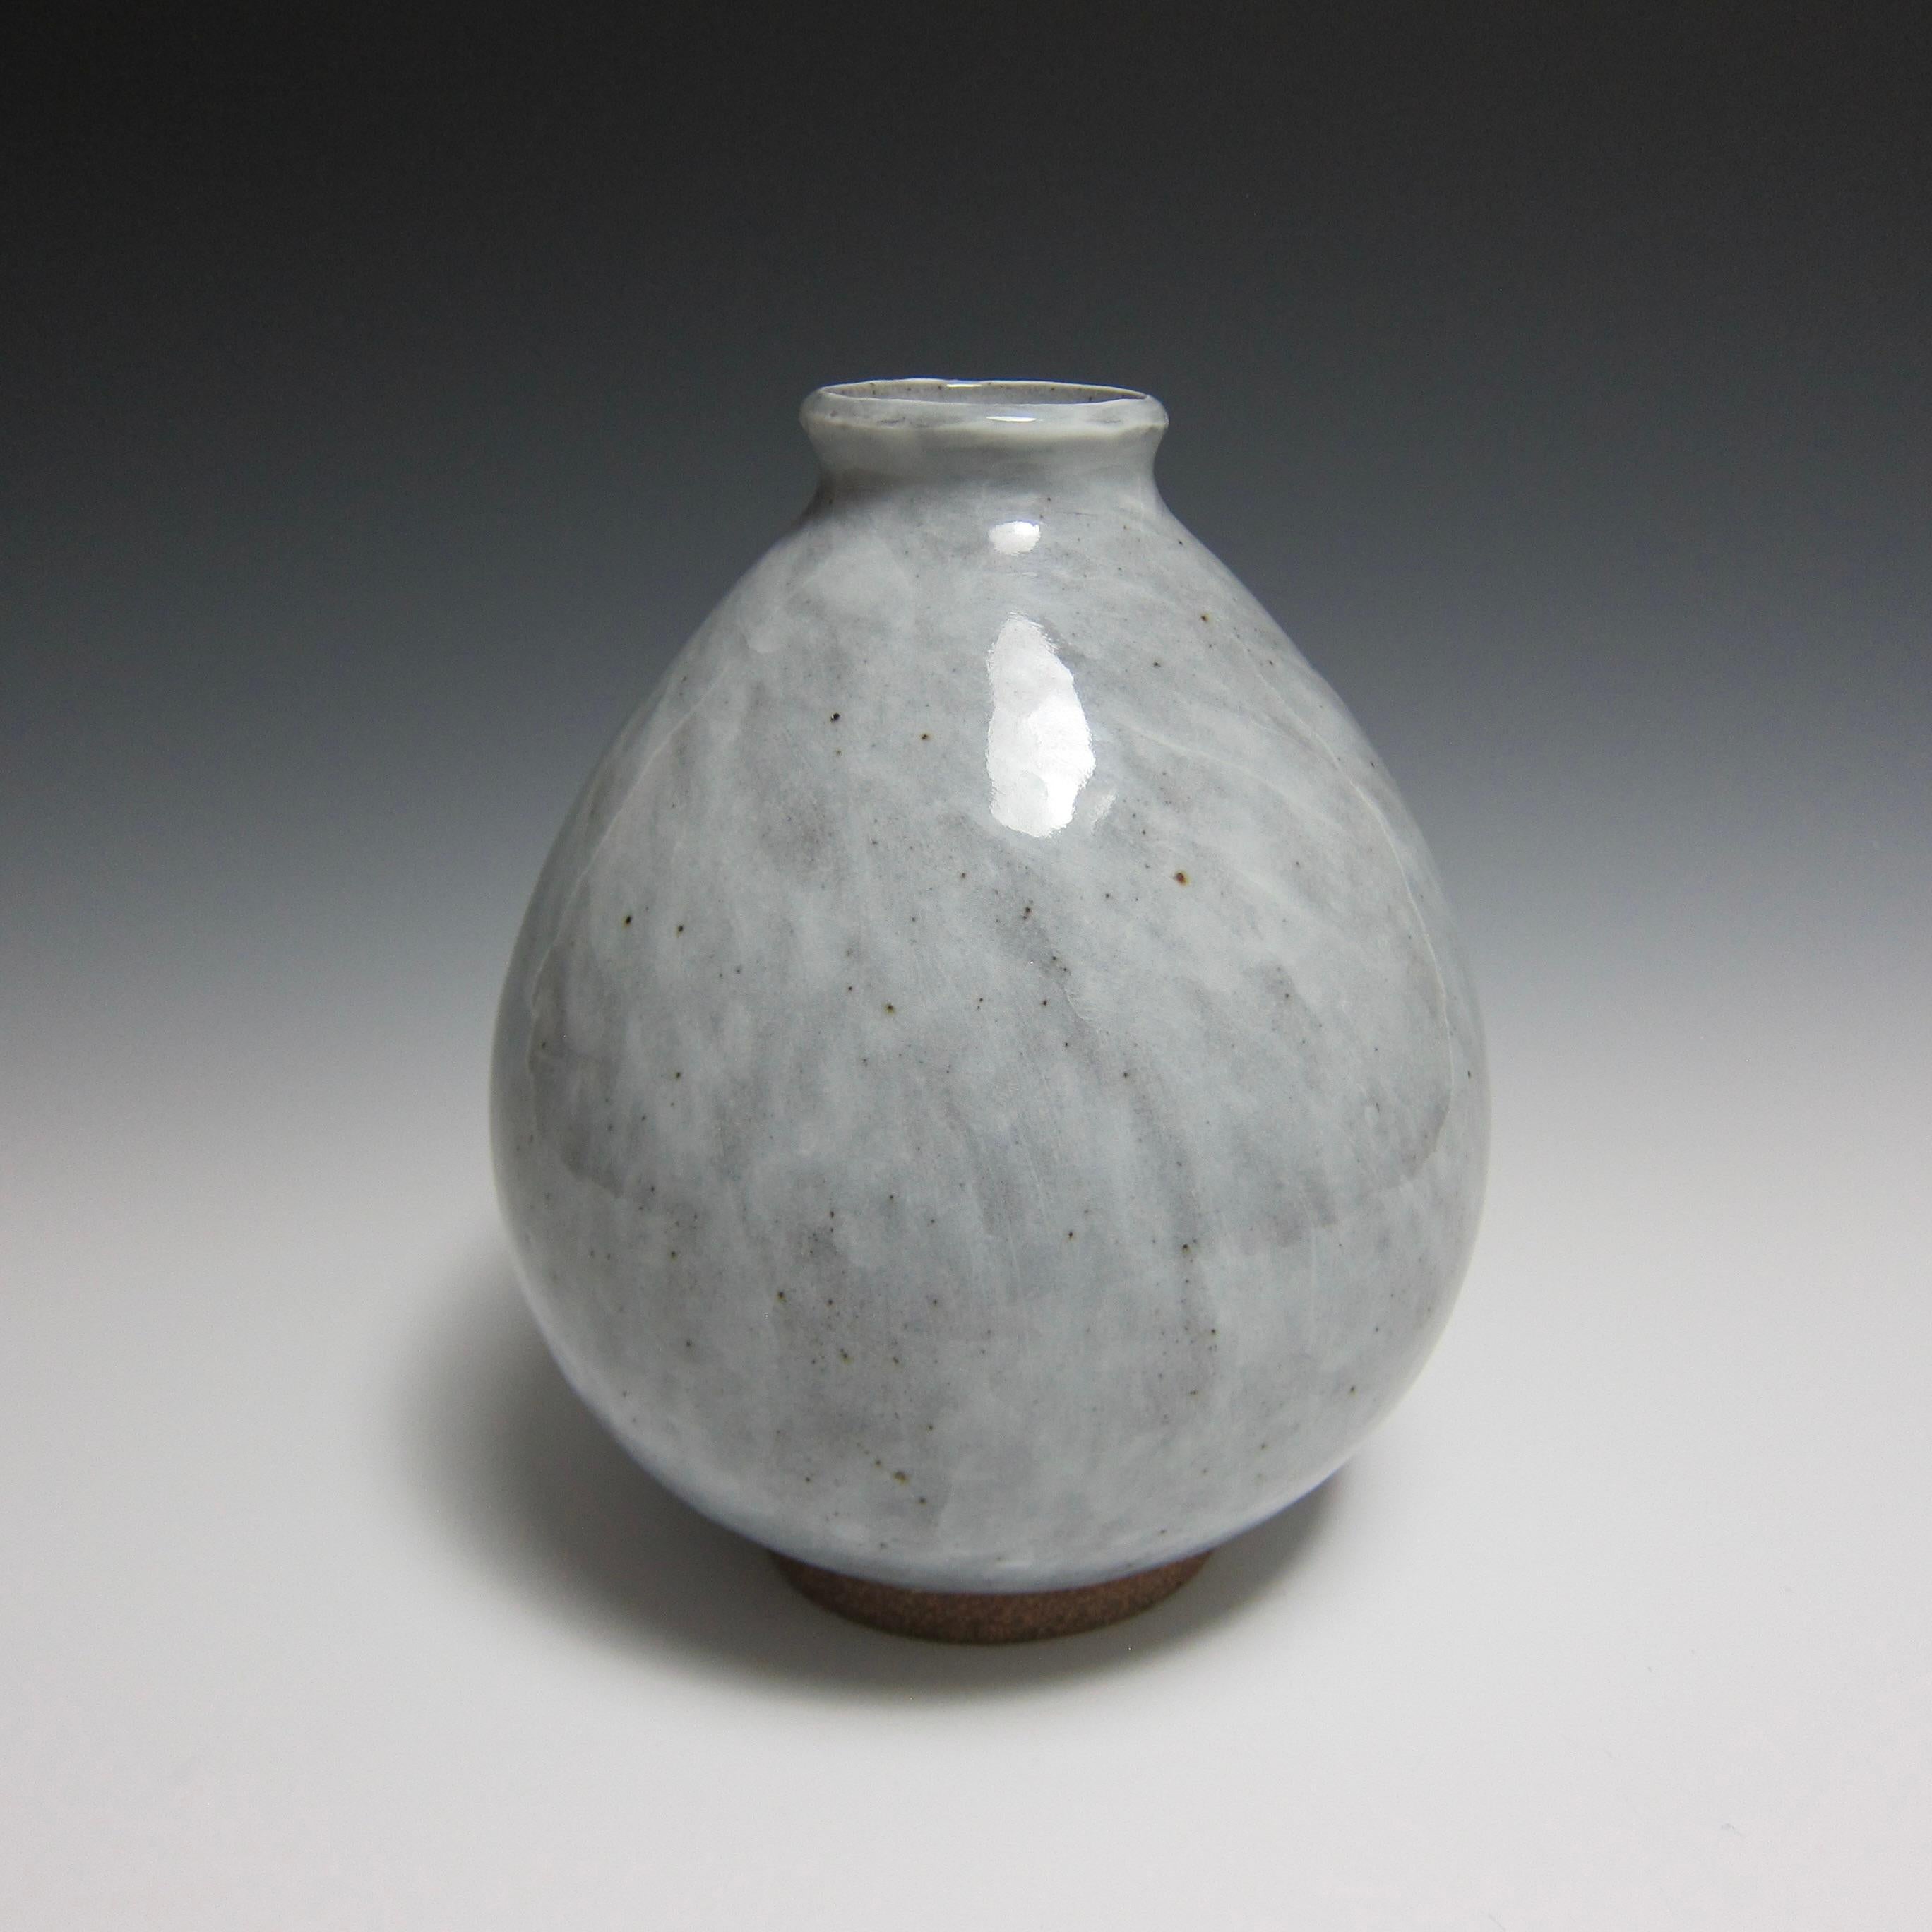 Wheel Thrown Ceramic Vase/ Flower Bottle by Jason Fox

Part of his Flower Bottle Series, American contemporary ceramic artist Jason Fox borrows inspiration from the antique Korean silhouette of the same name to create a vase perfect for both wet